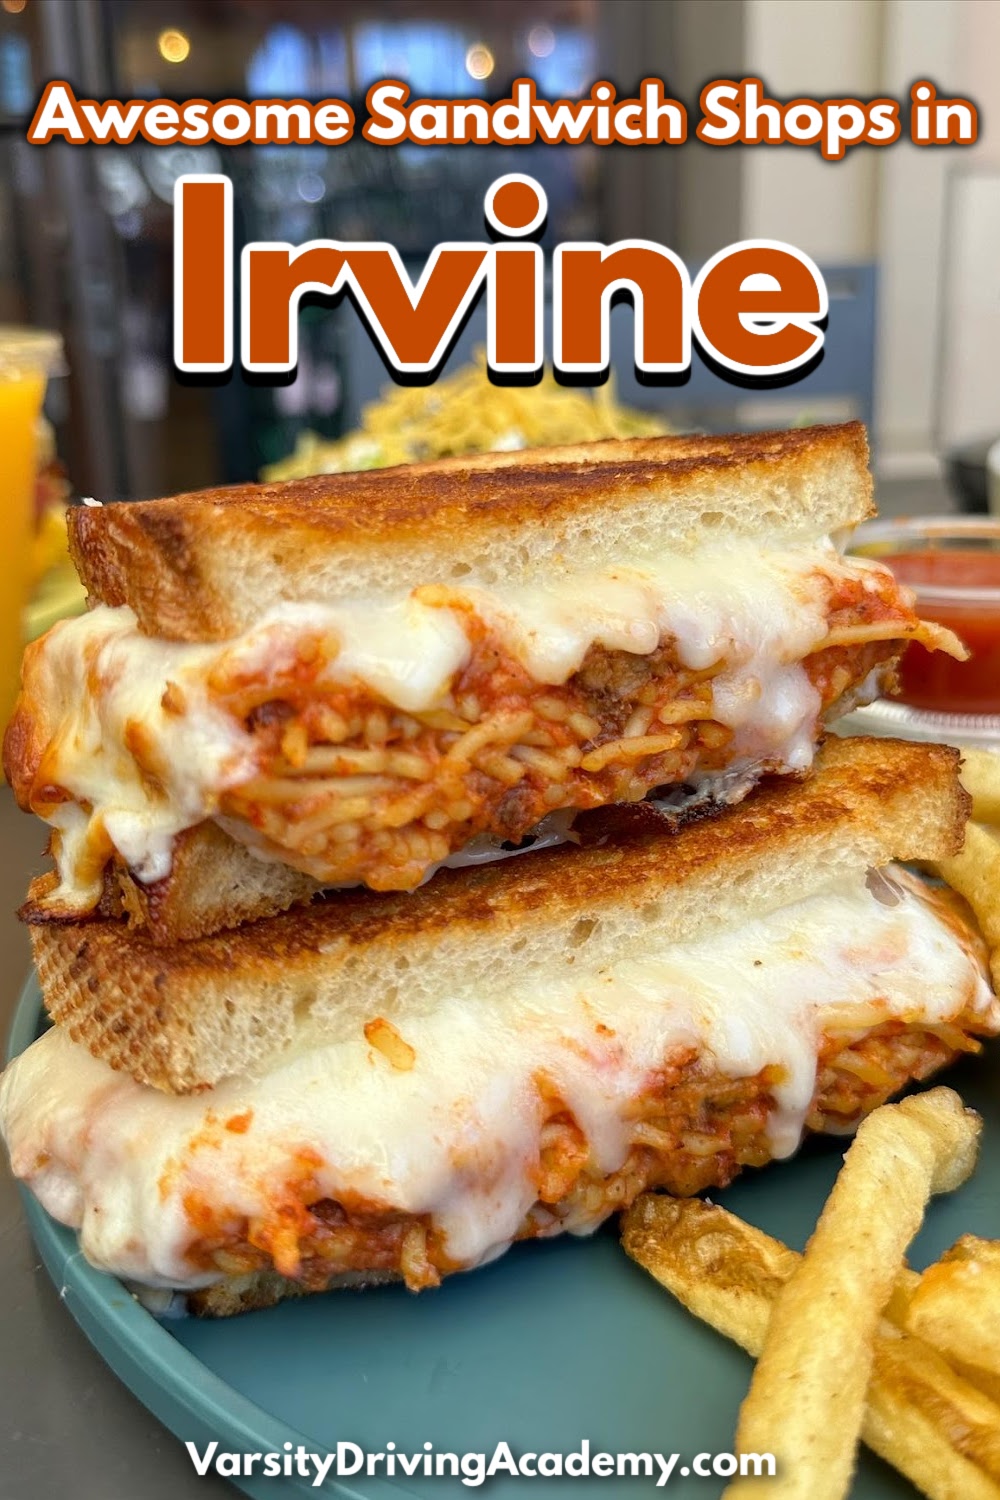 There are more than a few awesome sandwich shops in Irvine and it is your duty to try each one as often as possible.